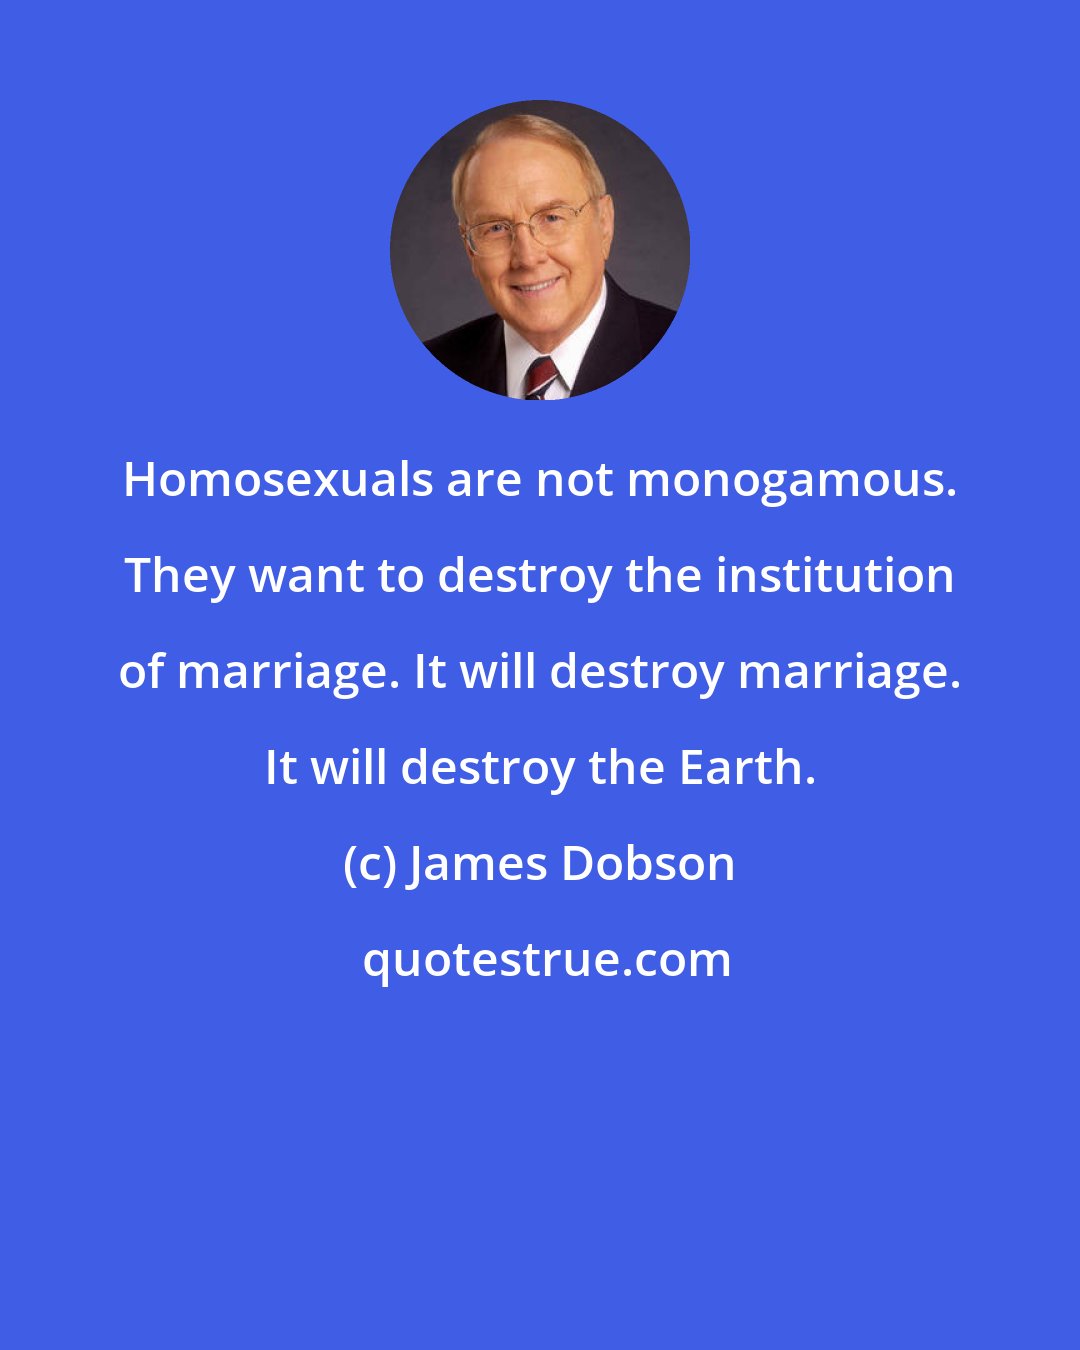 James Dobson: Homosexuals are not monogamous. They want to destroy the institution of marriage. It will destroy marriage. It will destroy the Earth.